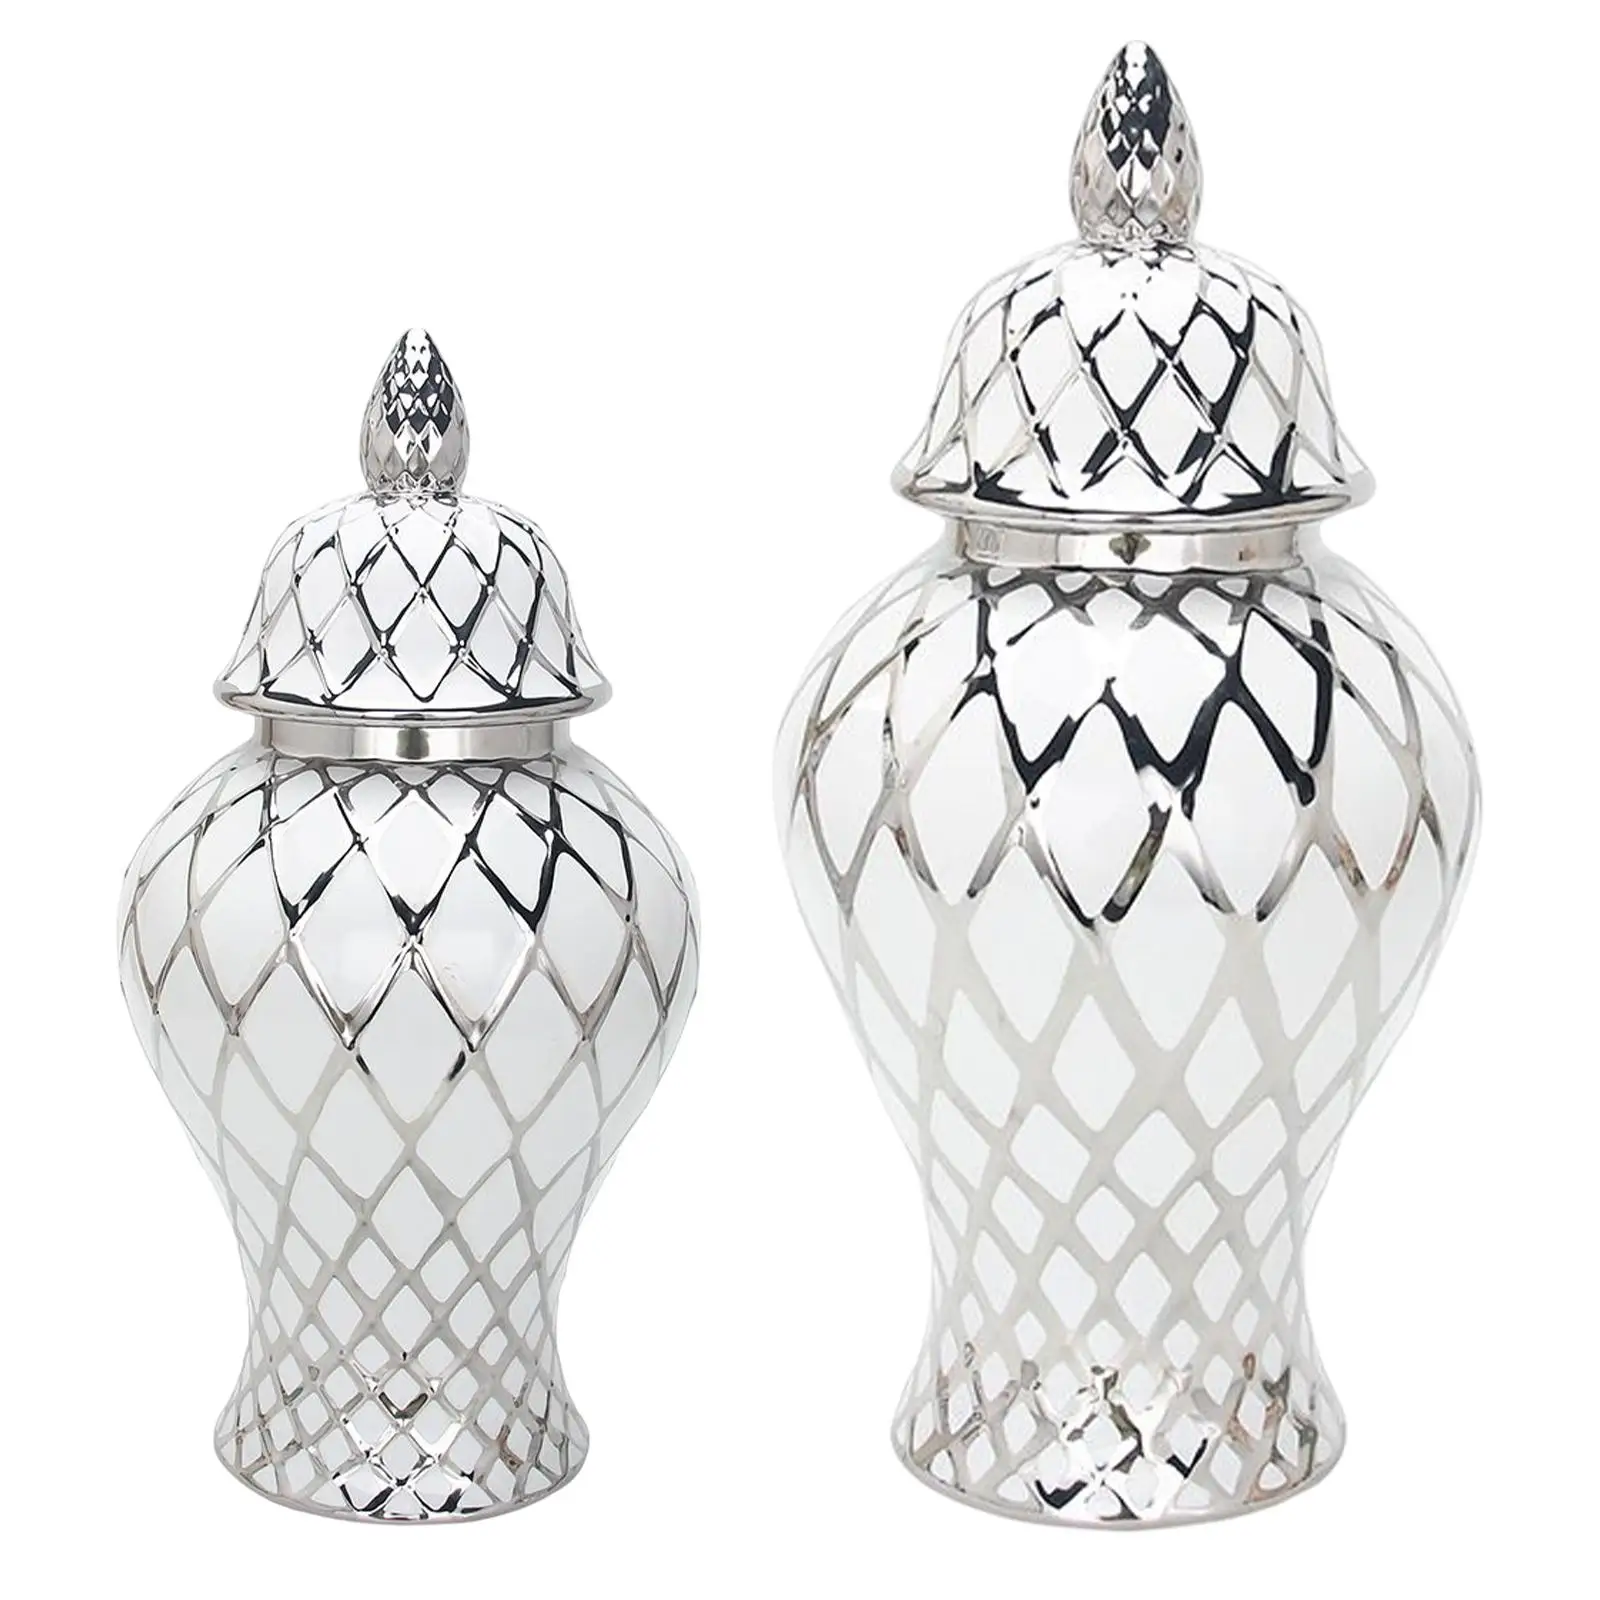 Modern Ginger Jar Lattice with Lid Ceramic for Tabletop Collection Entryway